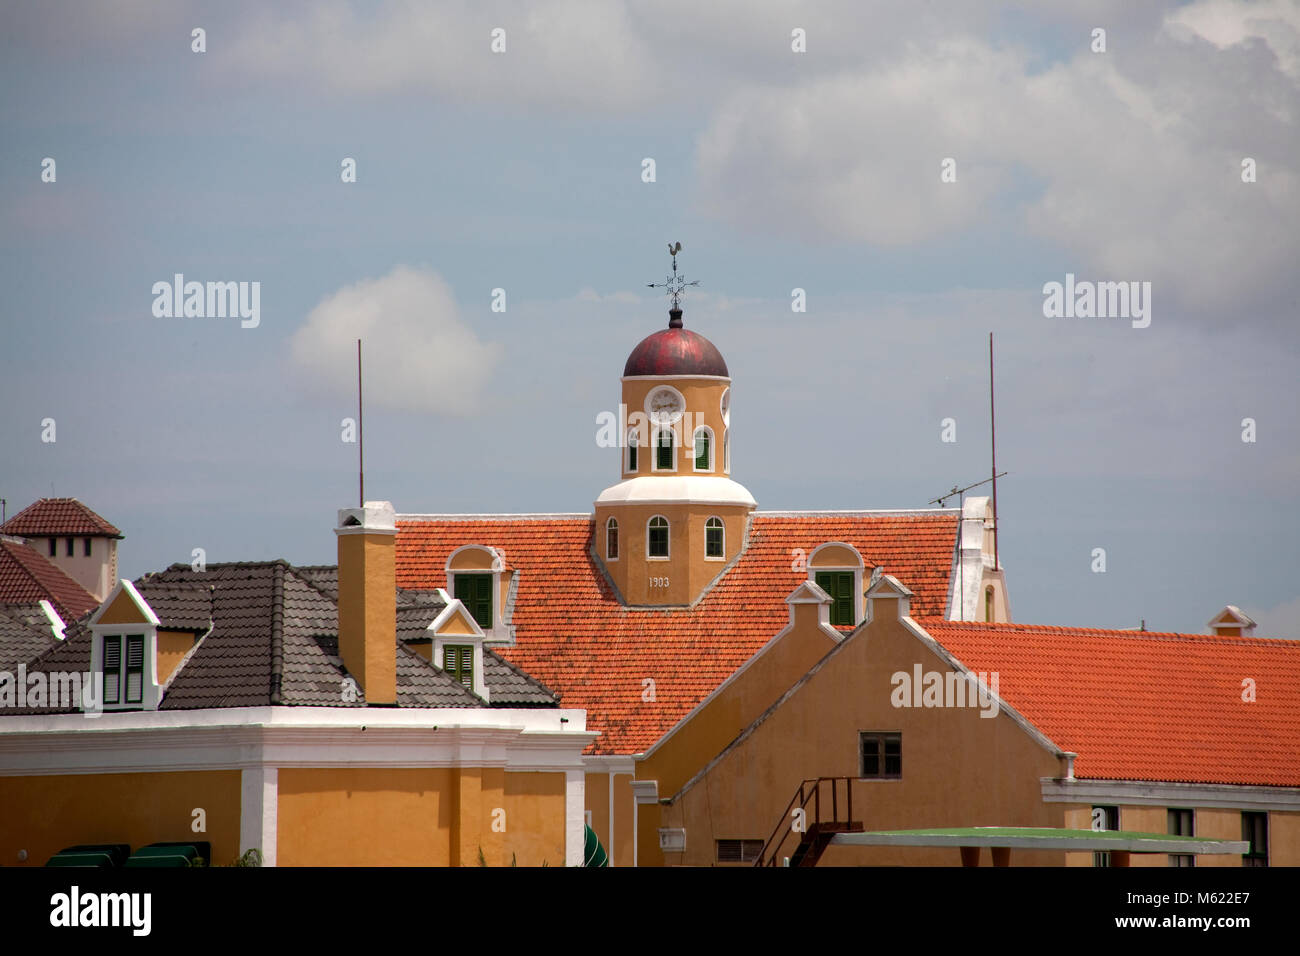 Typical historic colonial houses, netherland-caribbean style, Punda district, Willemstad, Curacao, Netherlands Antilles, Caribbean Stock Photo